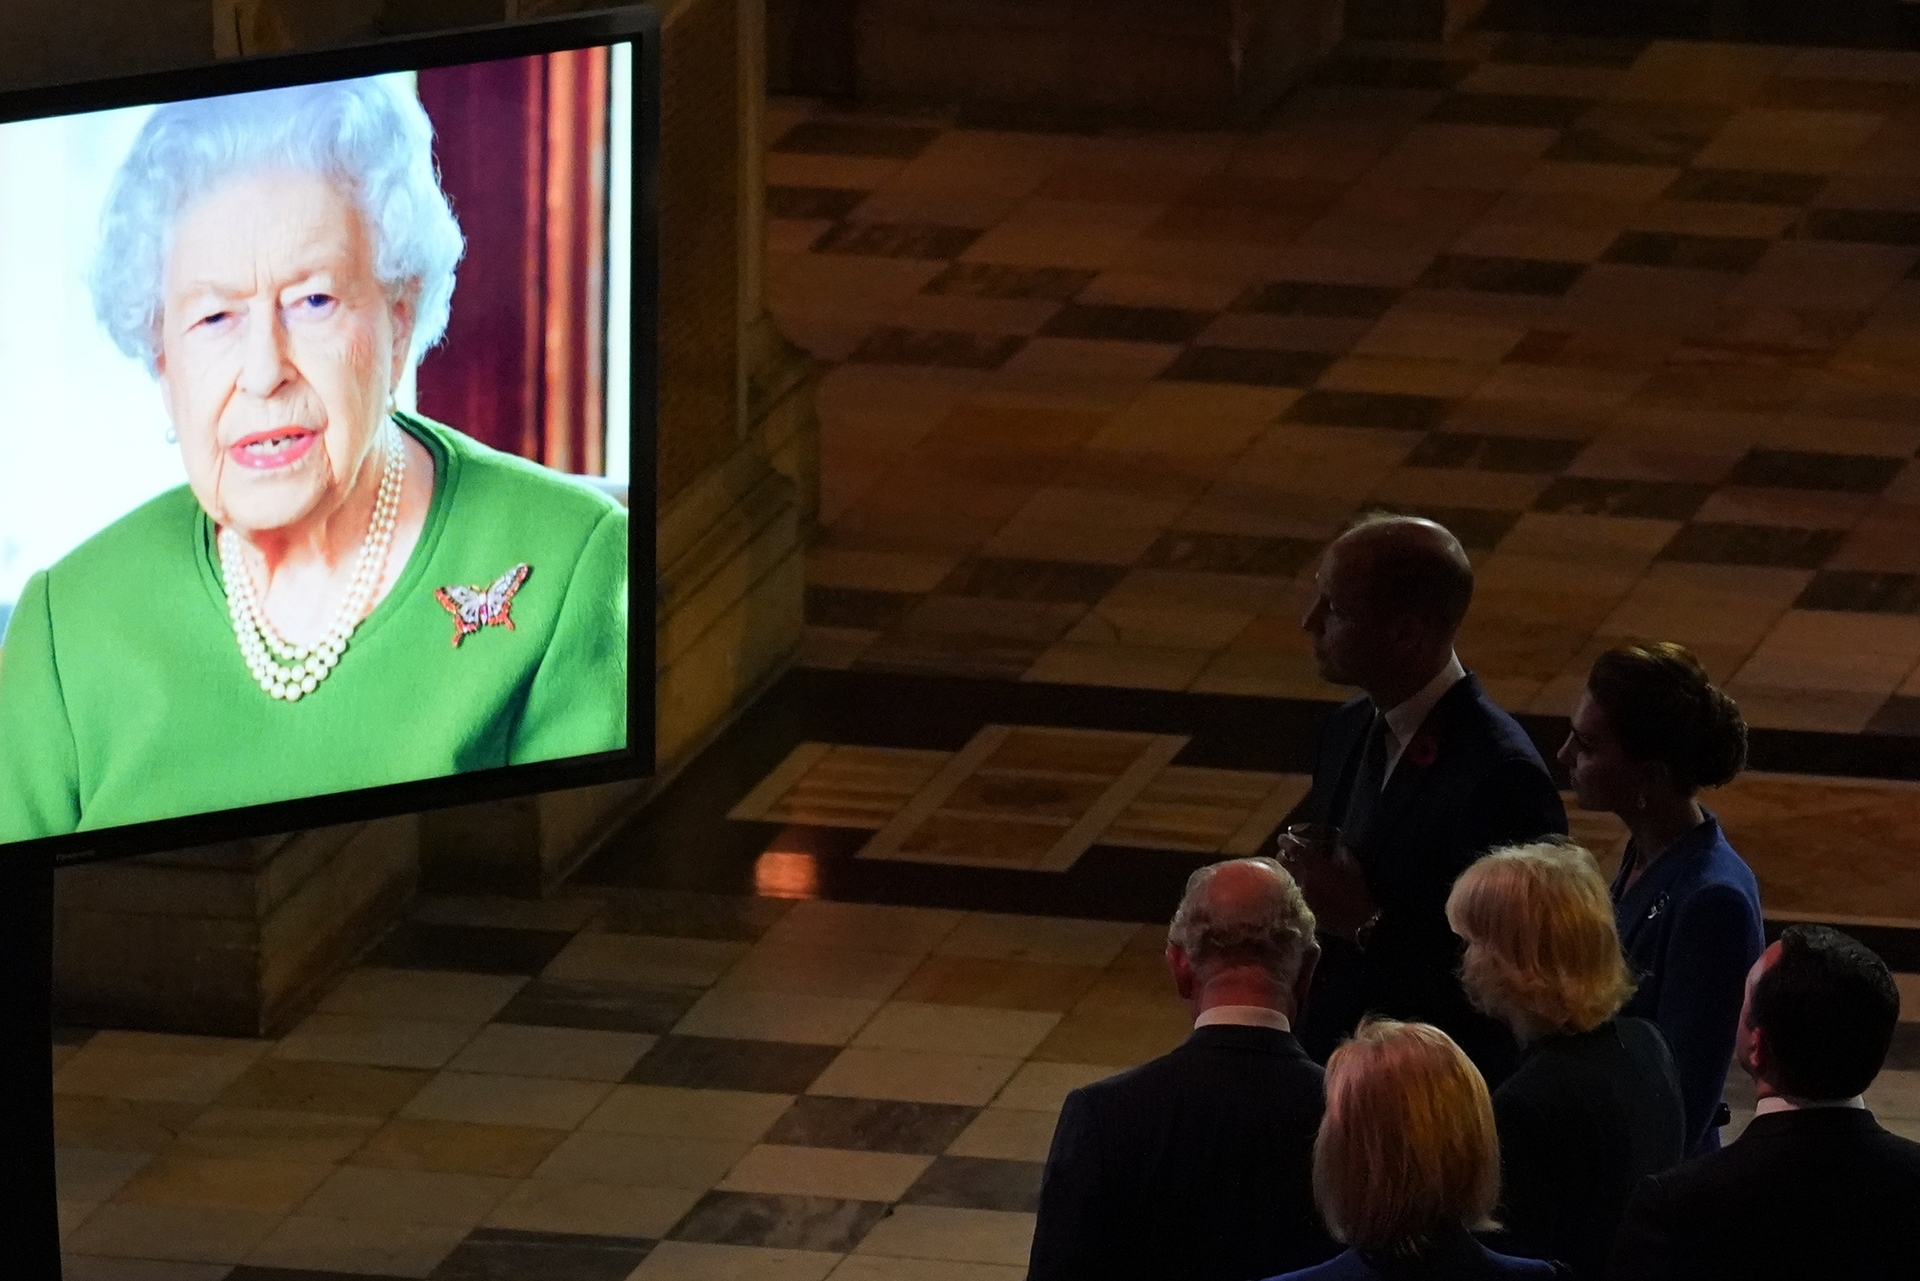 The Prince of Wales and the Duchess of Cornwall watching as the Queen makes a video message.